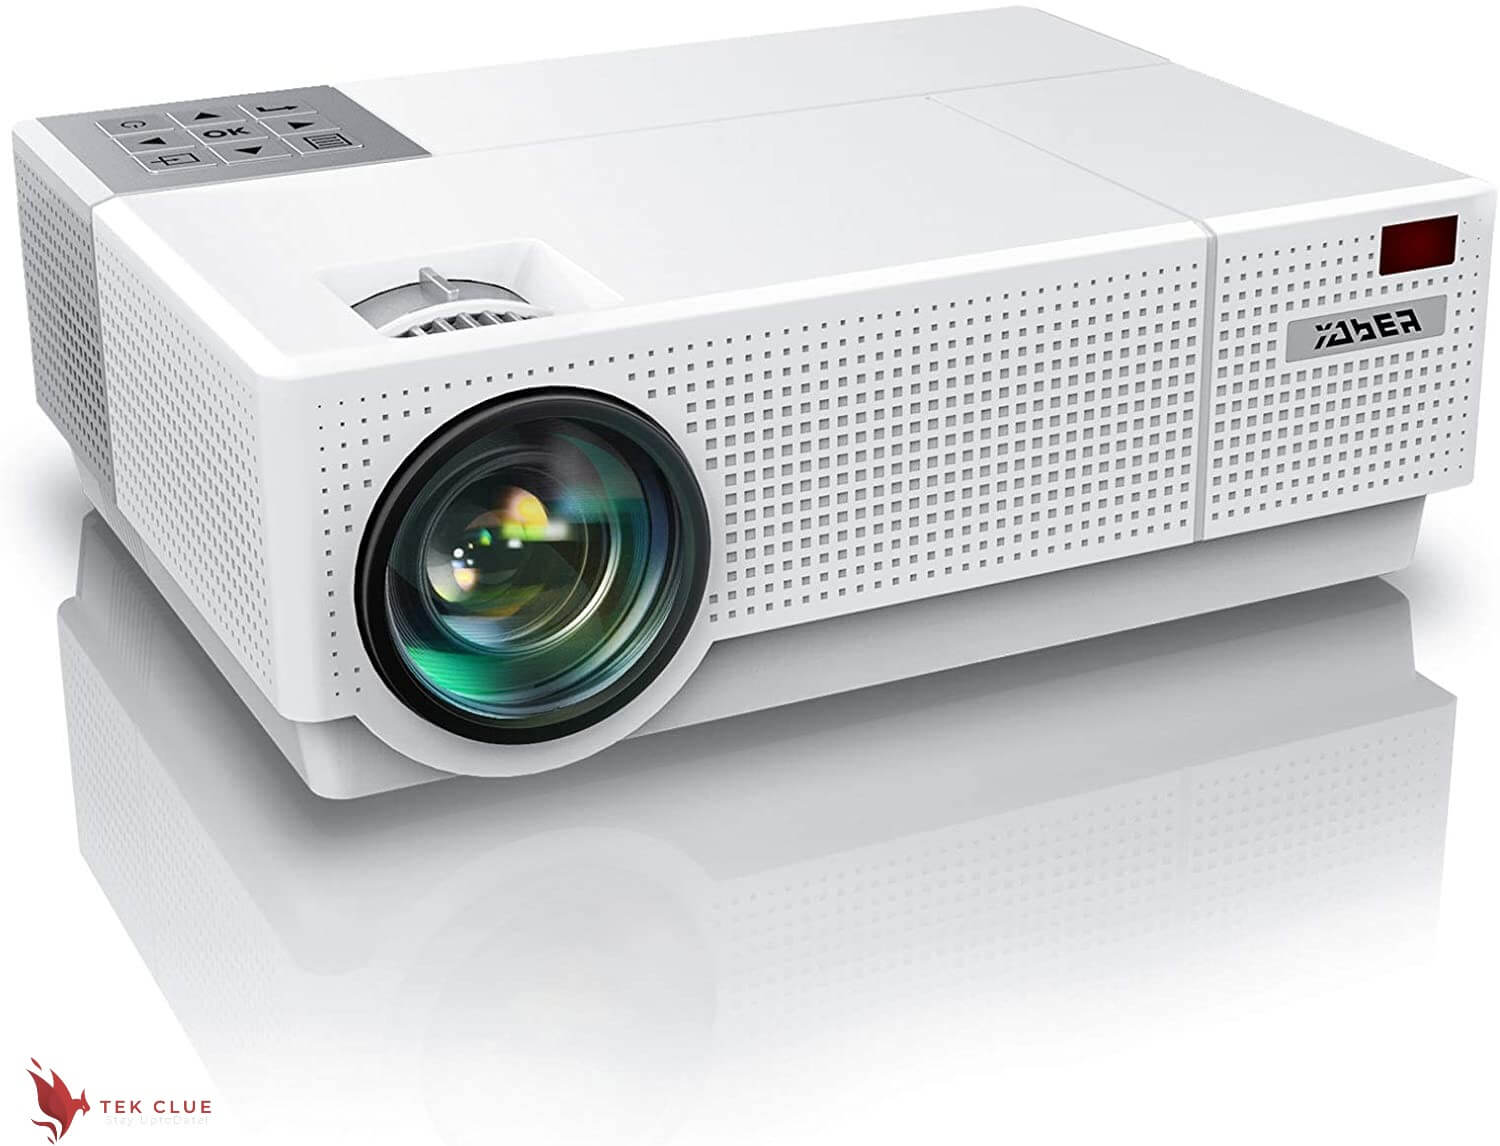 YABER Best Home Theater Projector (Best LCD Projector Under $500)